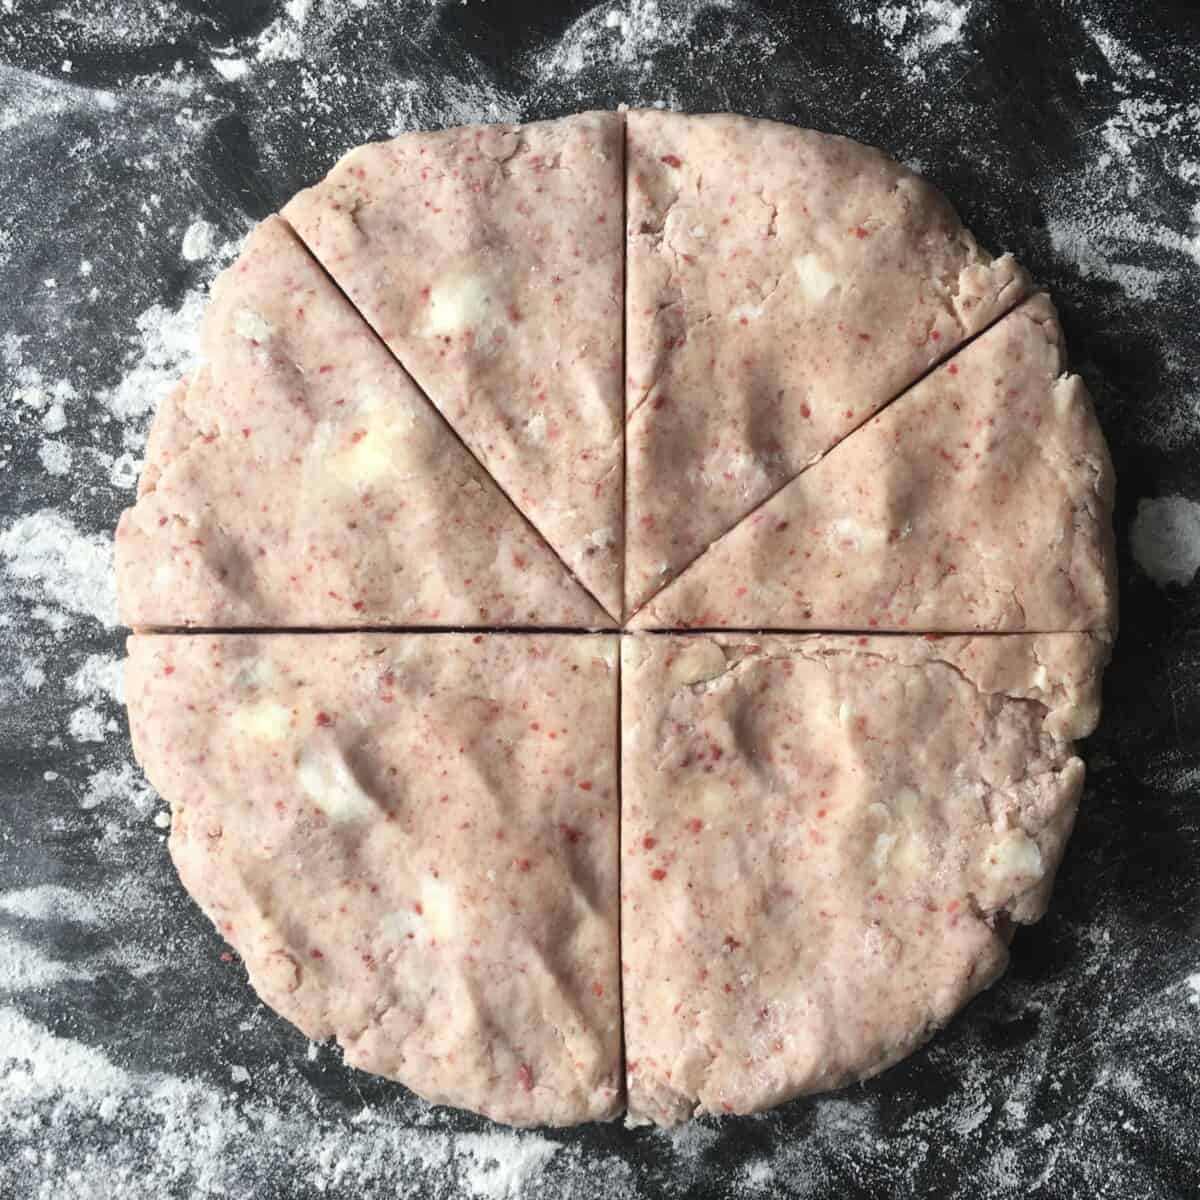 very pink strawberry scone dough with large flecks of butter throughout all in a lightly flattened round disc shape with the first triangular scone shapes cut and 2 of the quarters left without any cuts